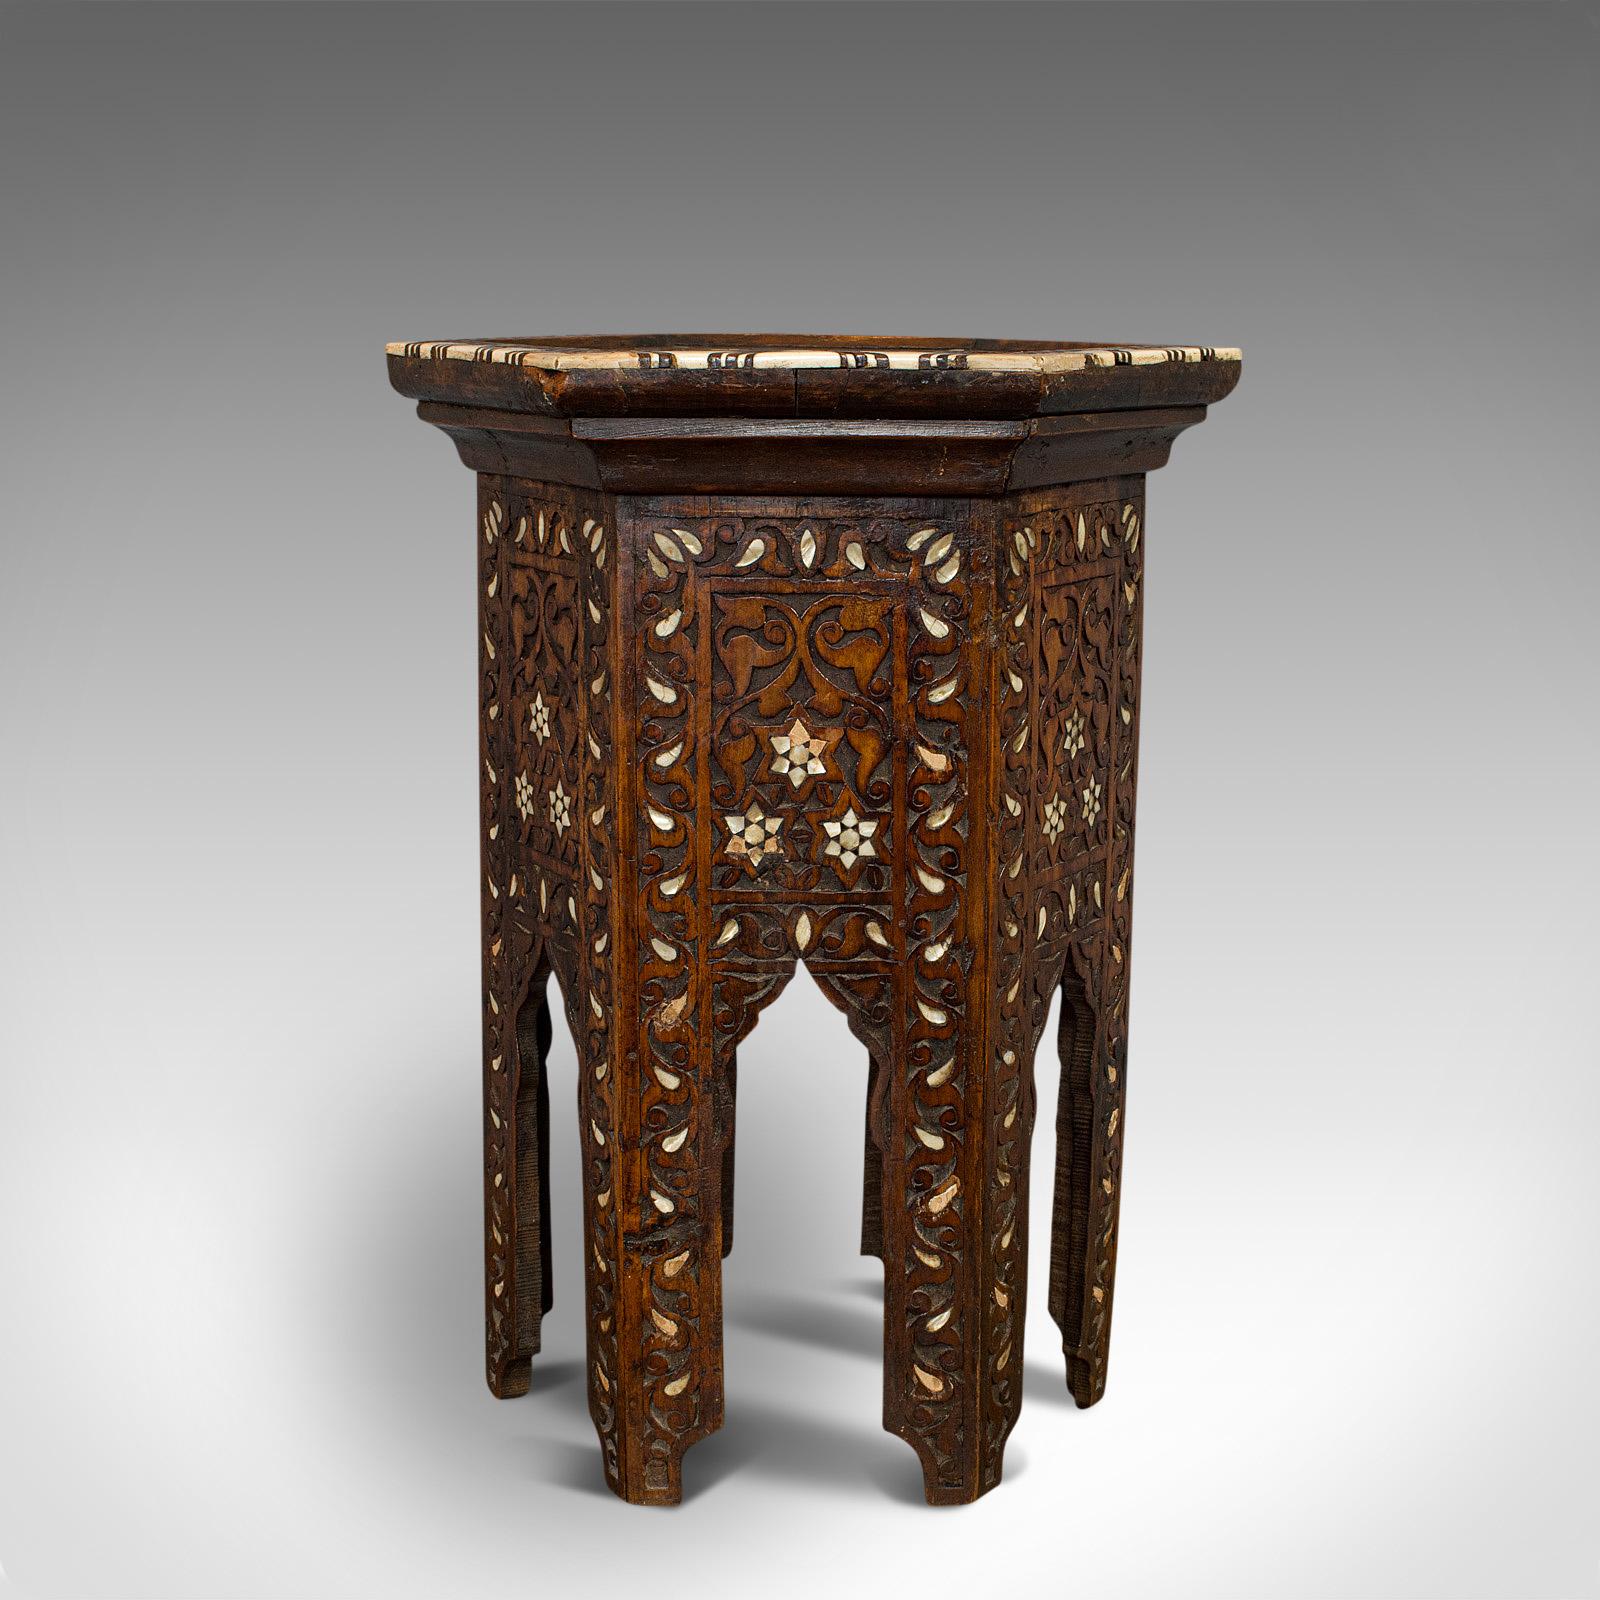 This is an antique side table. A Middle Eastern mahogany, Moorish-influenced hexagonal wine or occasional table, dating to the Victorian period, circa 1880.

Exotic taste with fascinating details
Displays a desirable aged patina
Carved mahogany